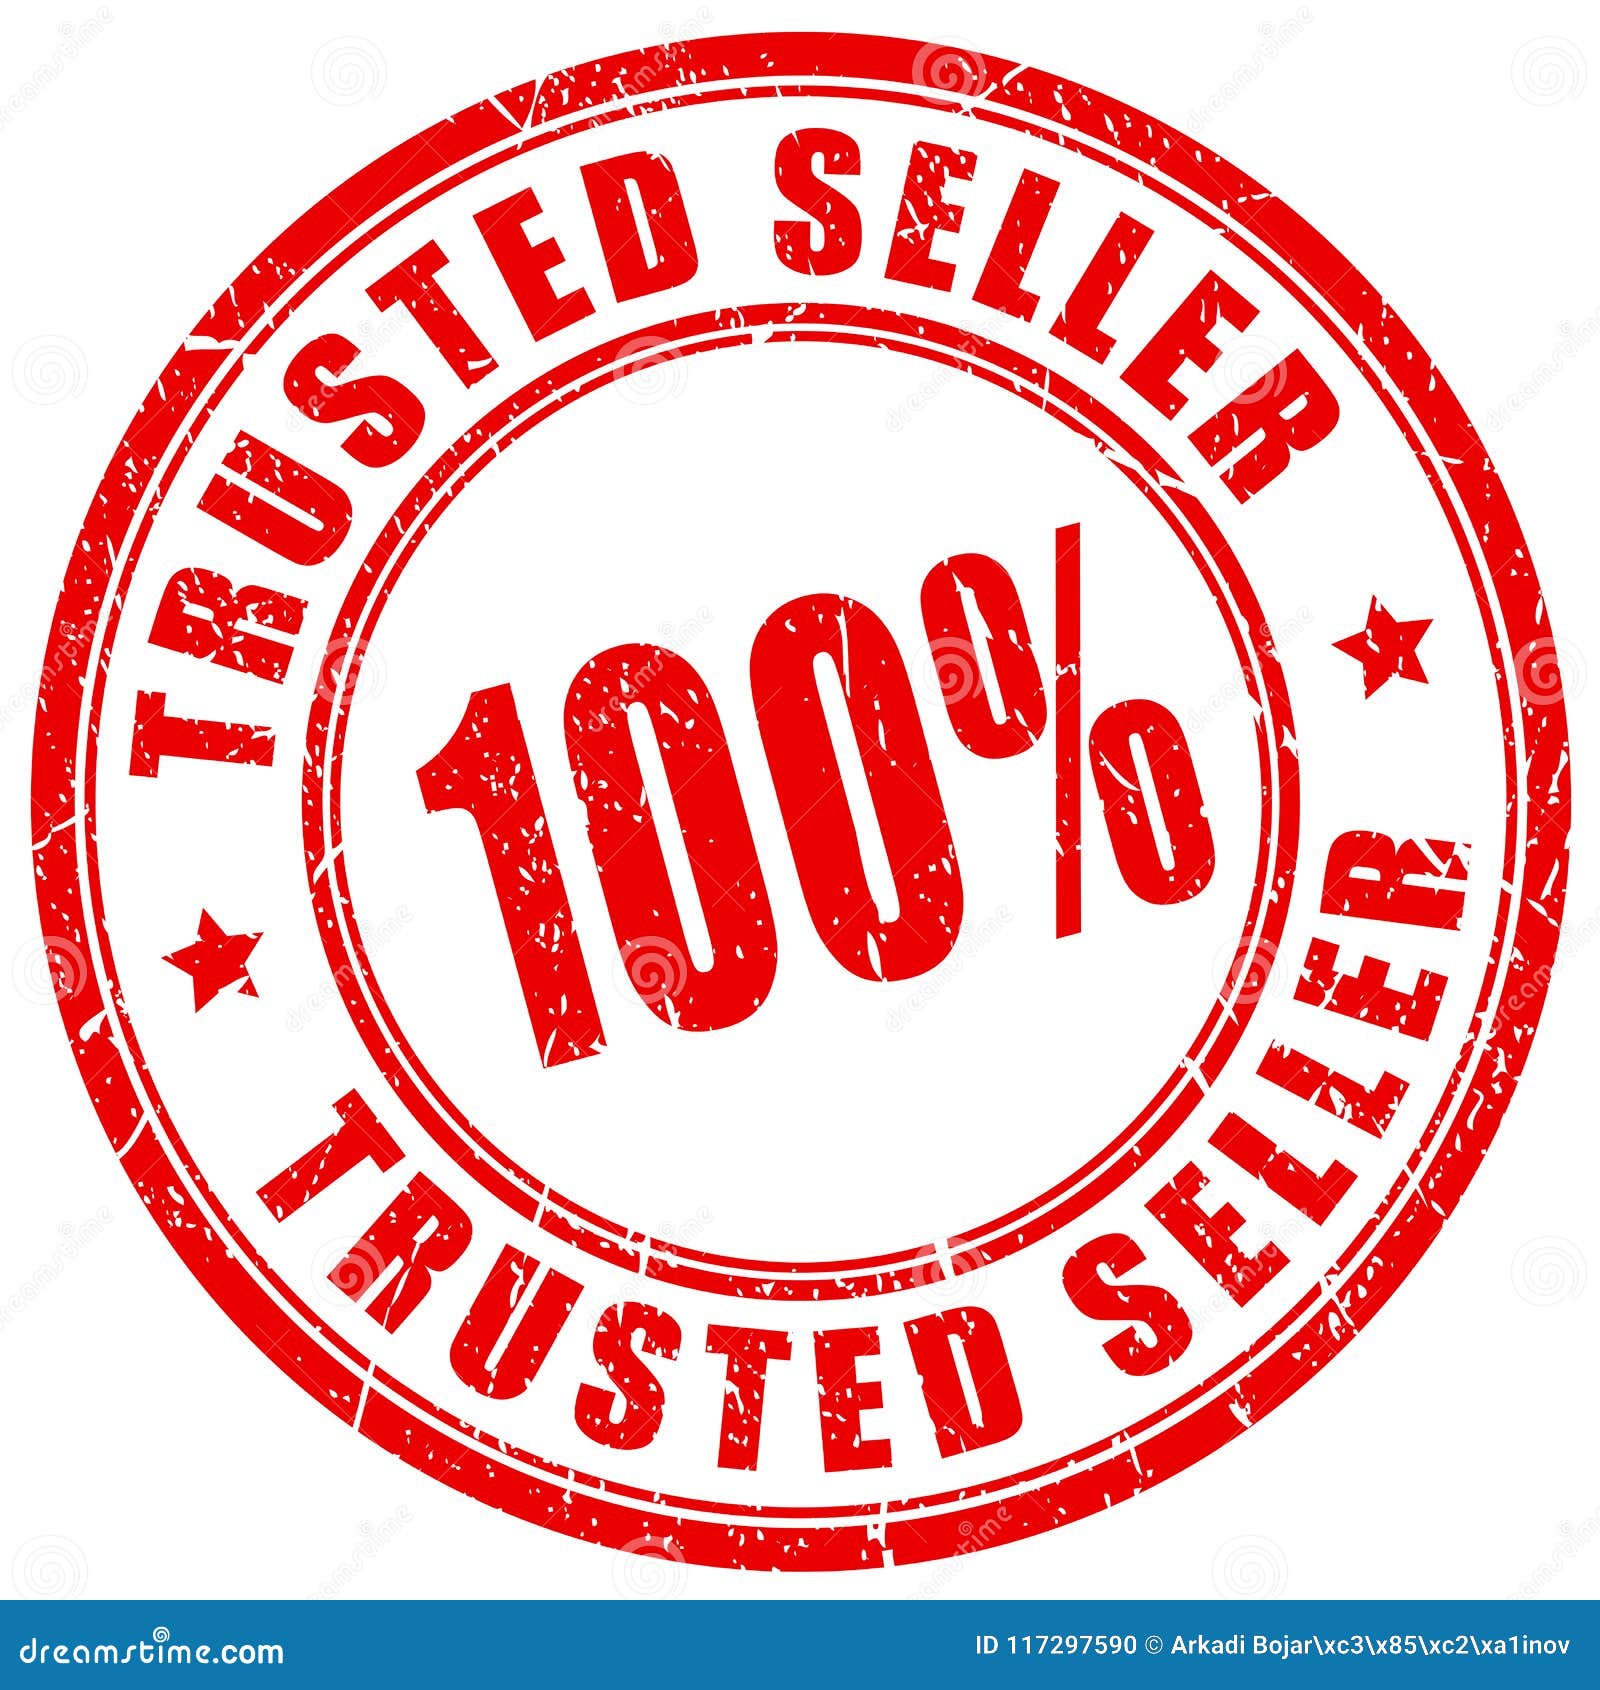 trusted seller  stamp